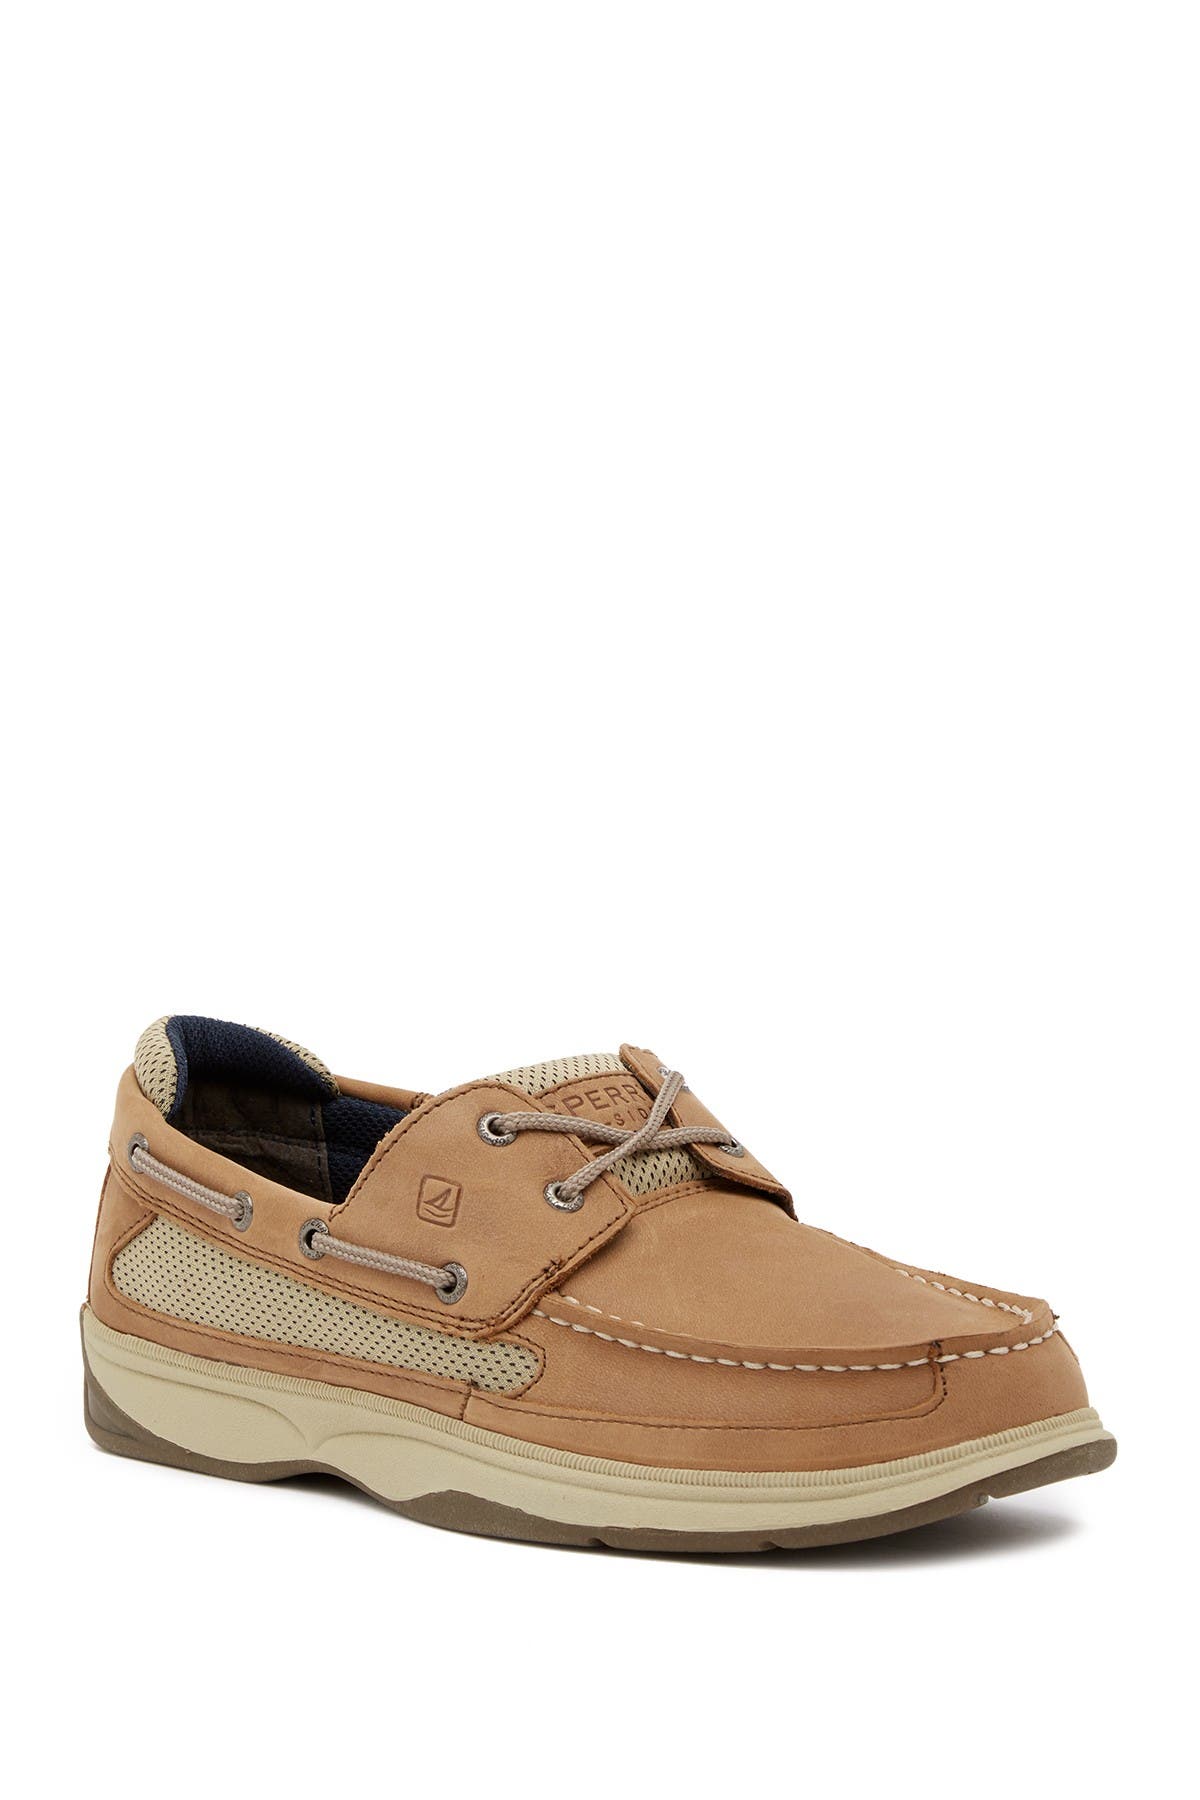 how to clean nubuck sperrys